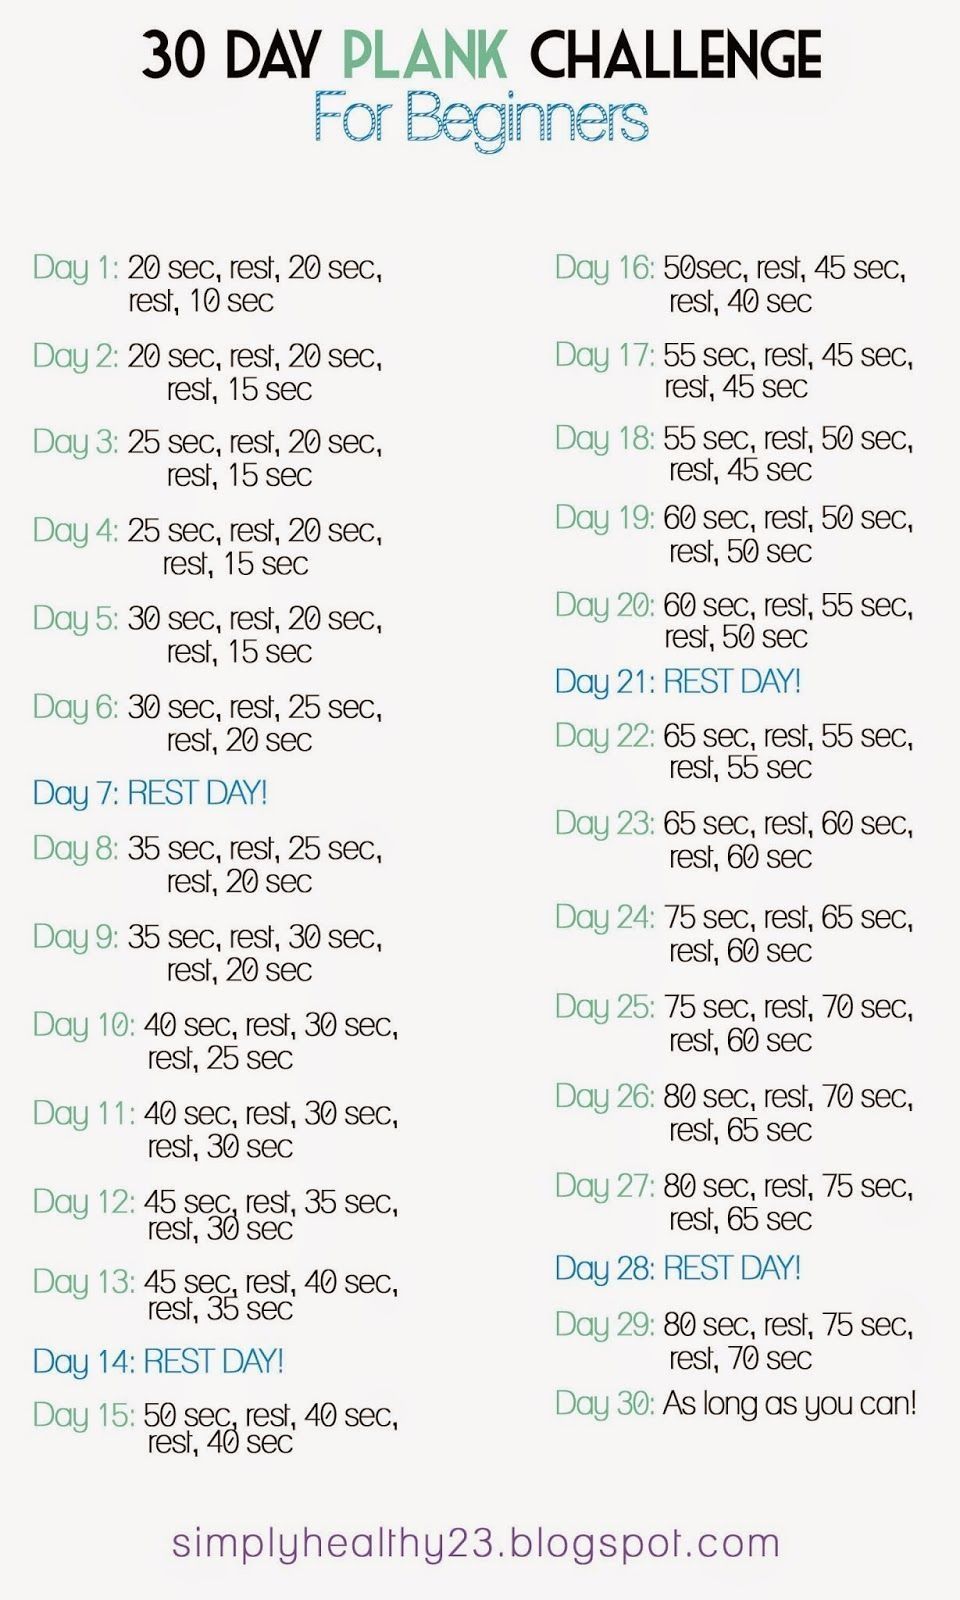 30 day plank challenge printable in word 31